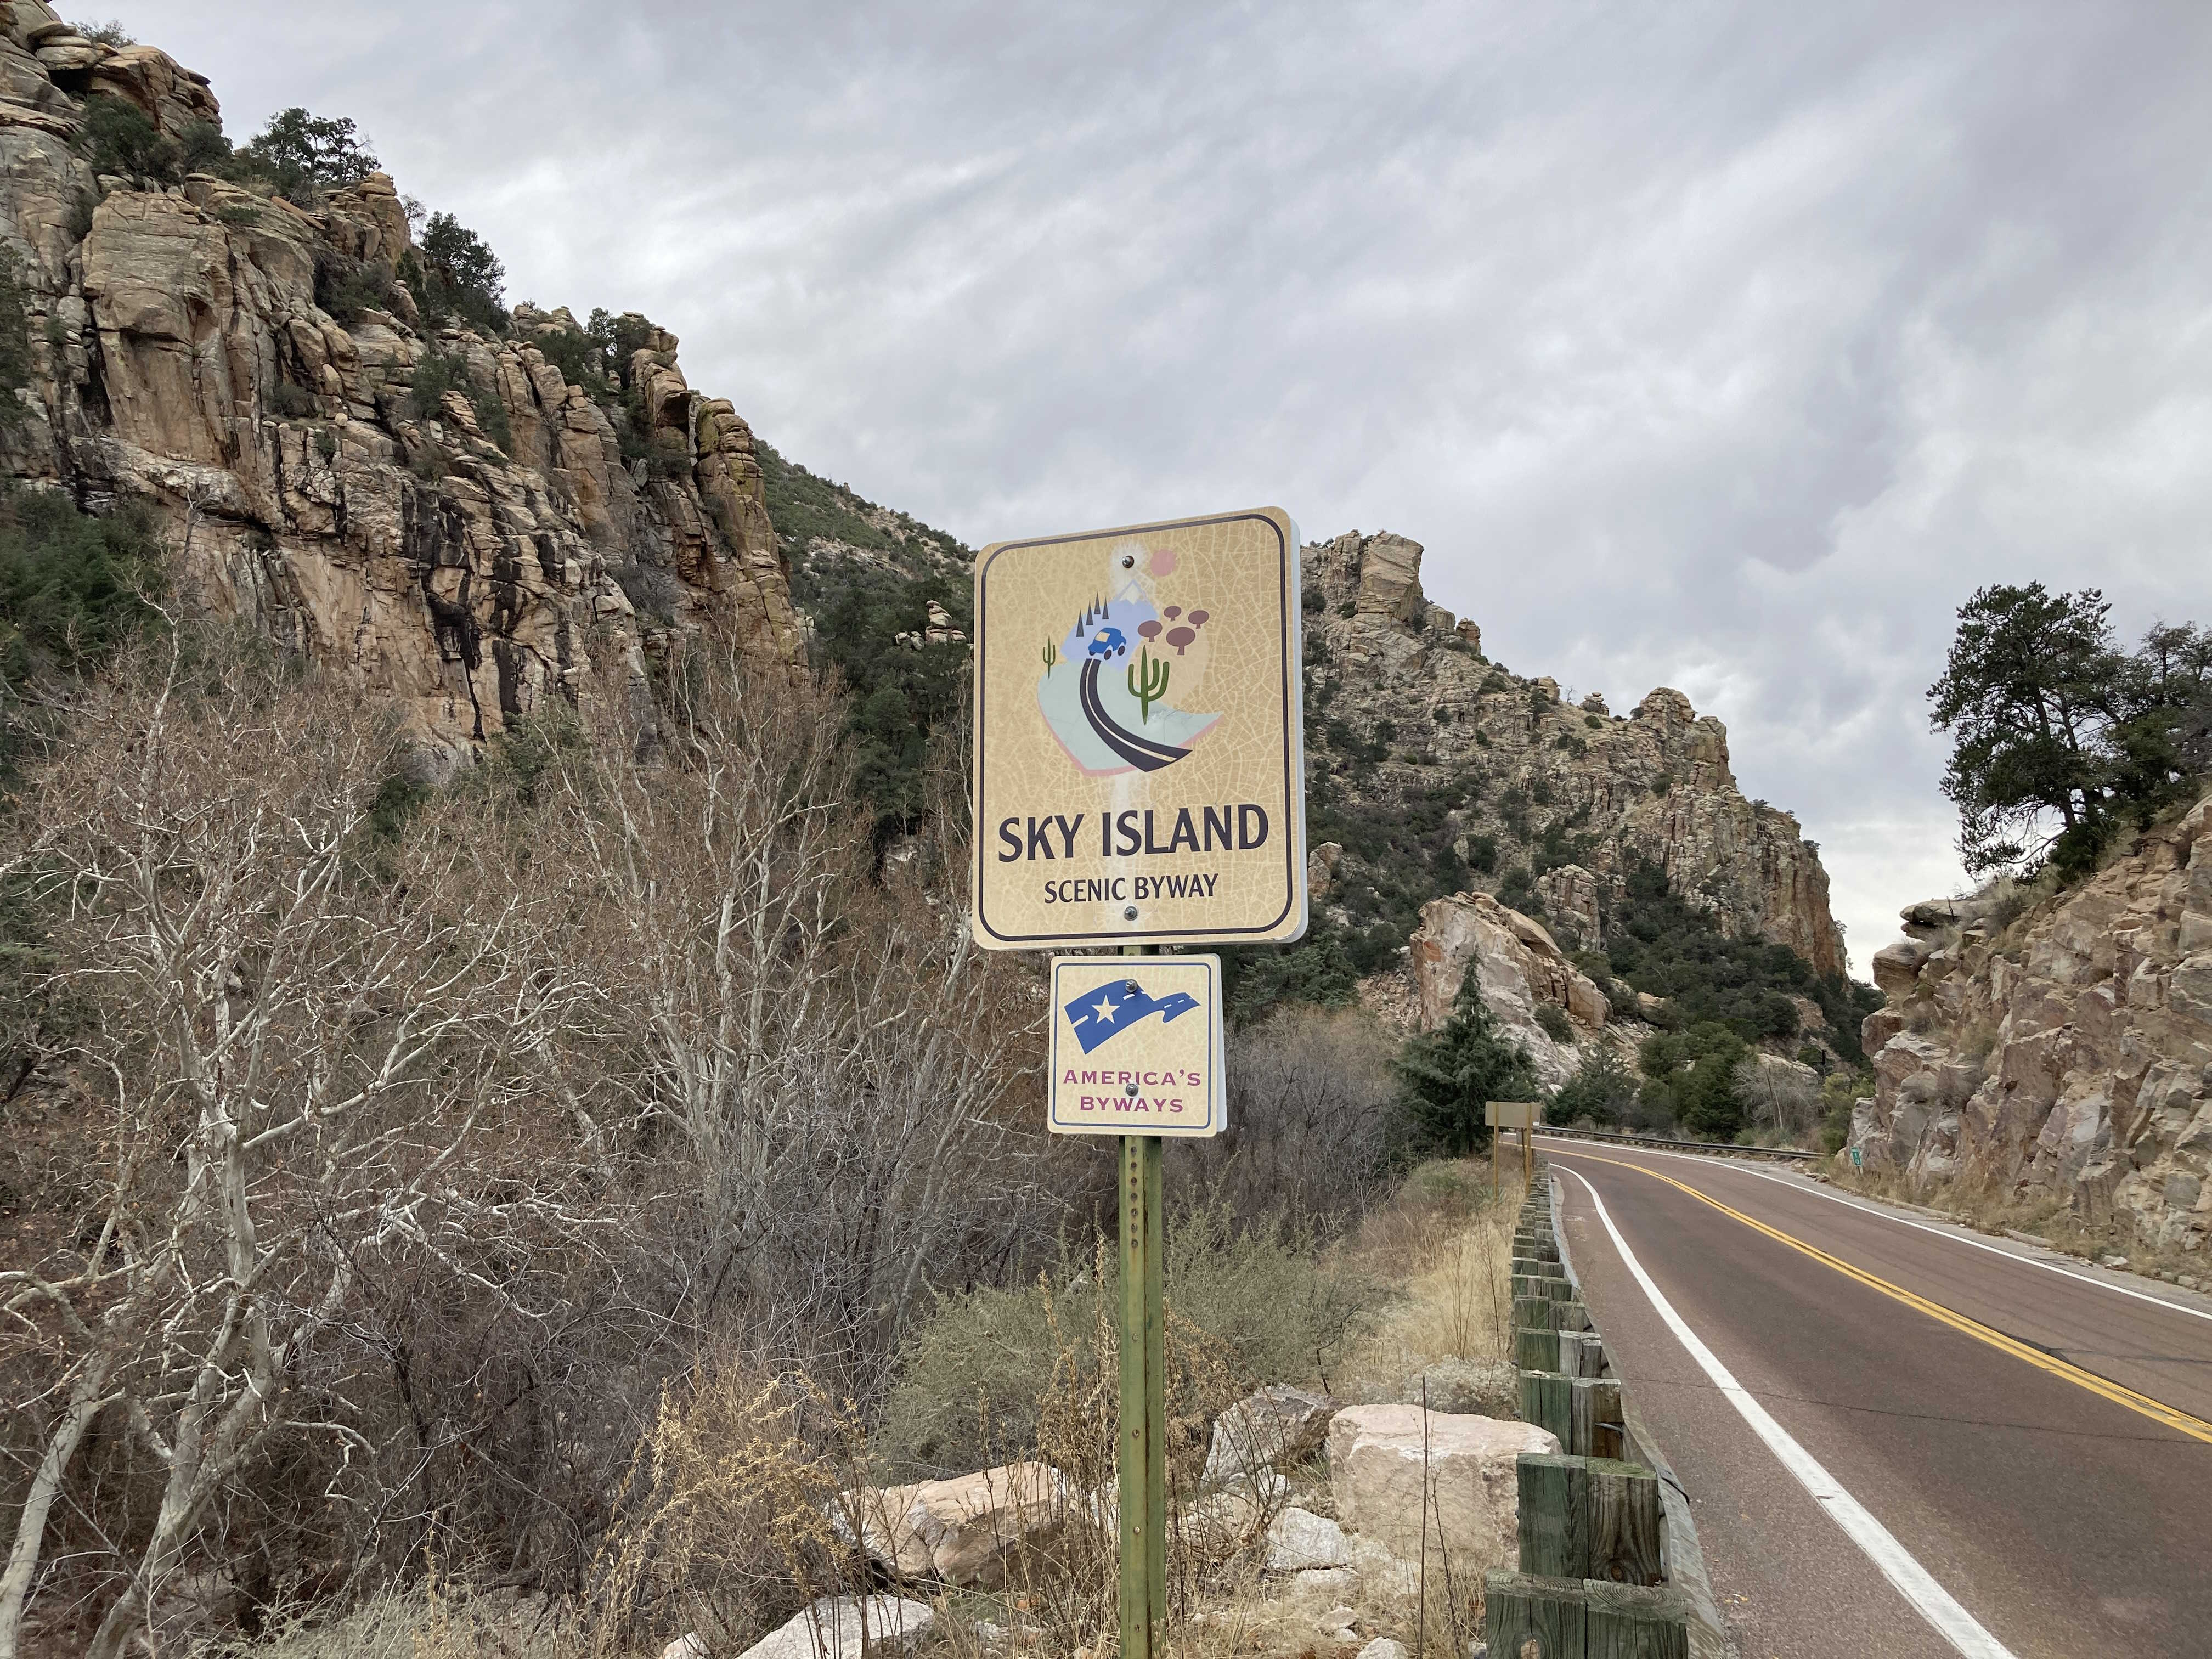 Sky Island National Scenic Byway